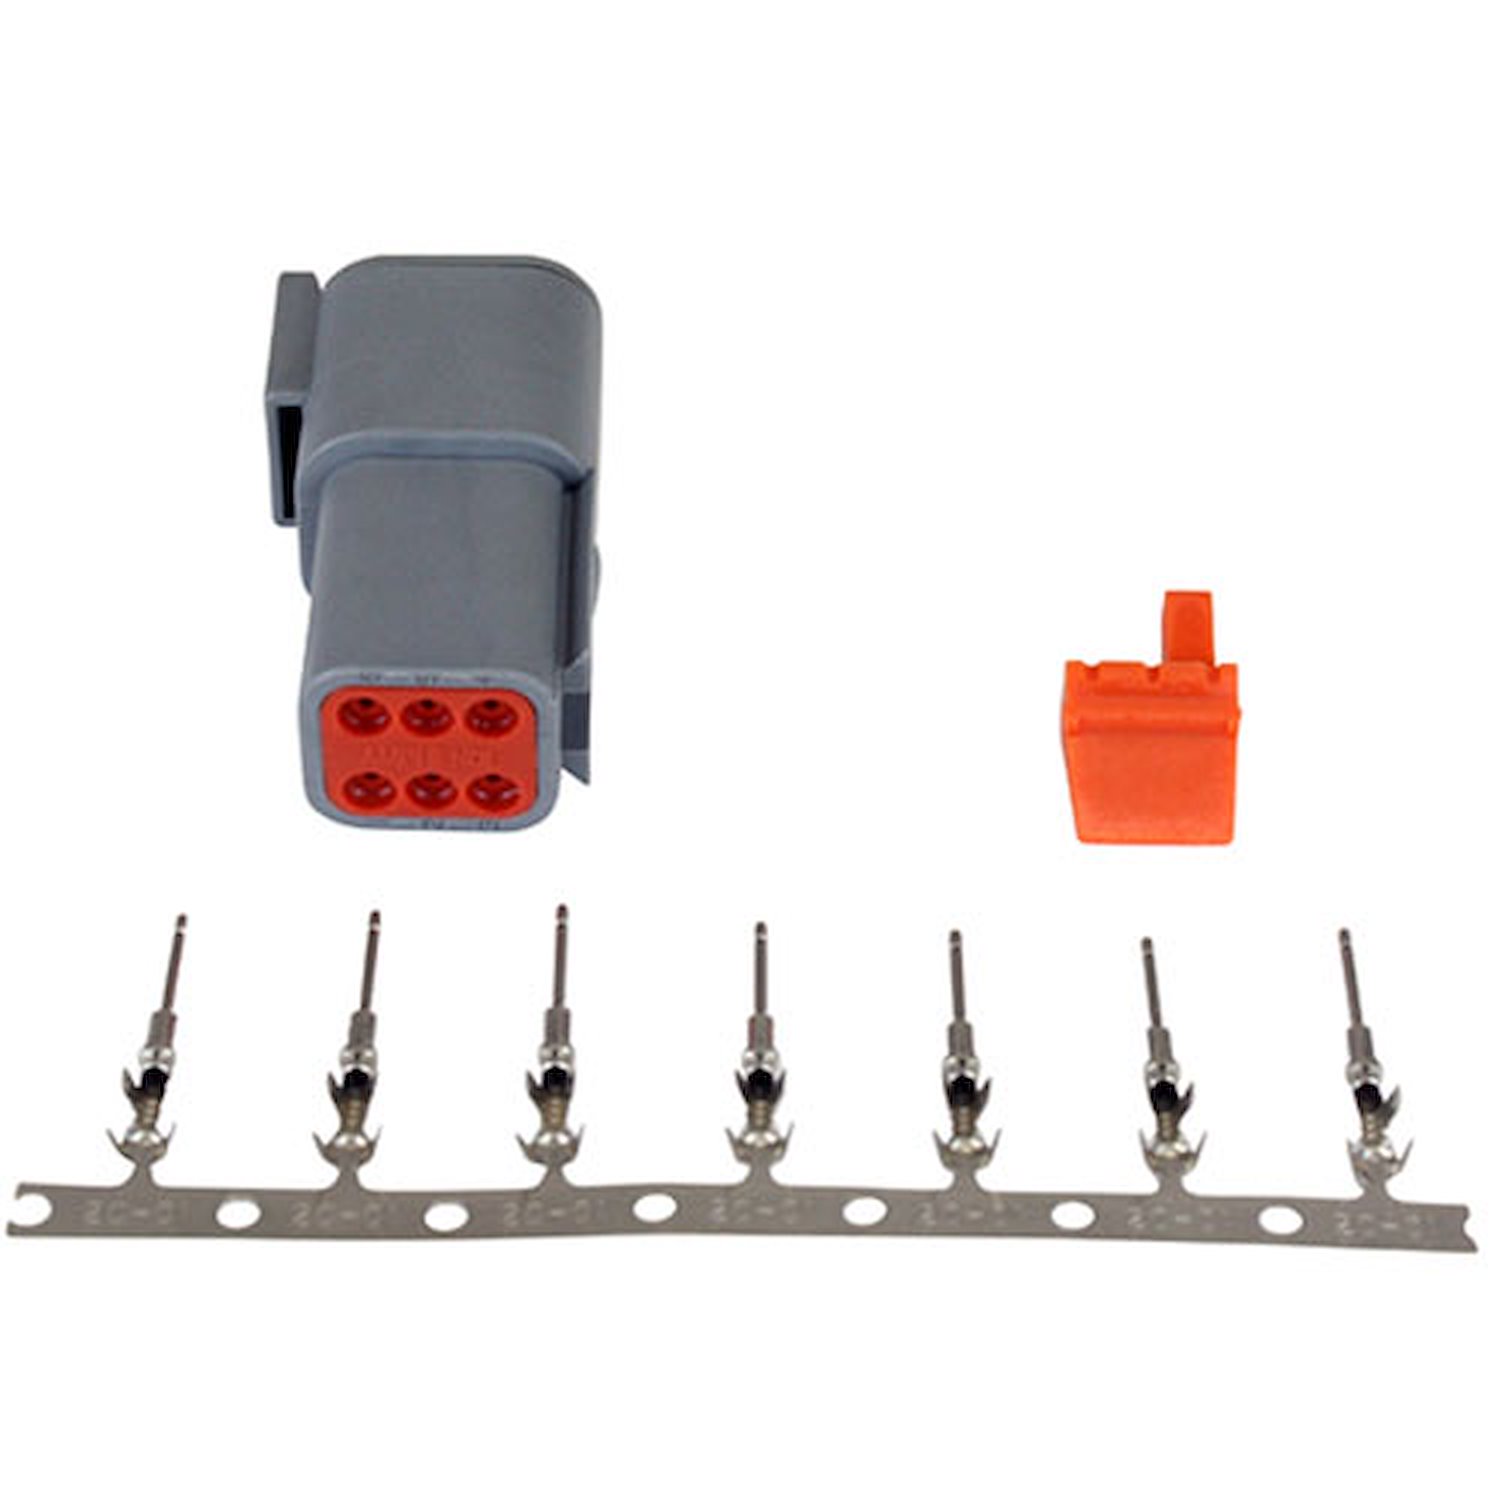 DTM-Style 6-Way Receptacle Connector Kit Includes Receptacle,